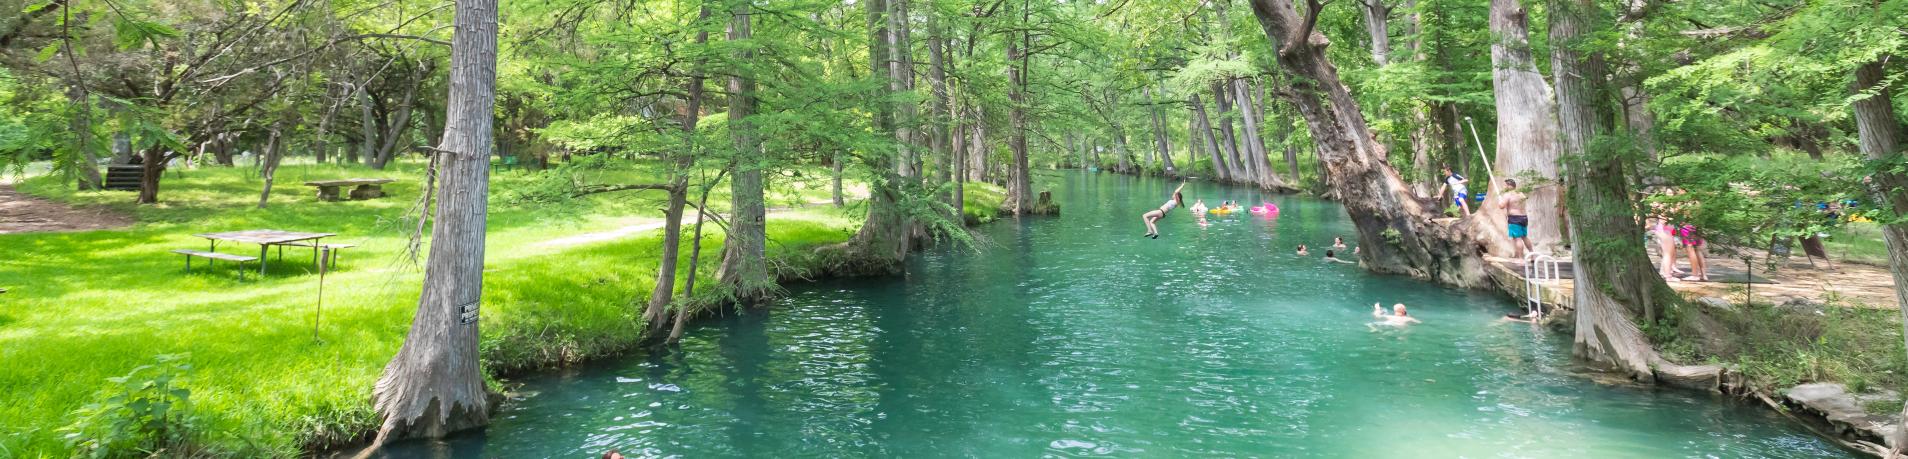 How To Plan the Best Day in Wimberley Texas - Plan to Explore